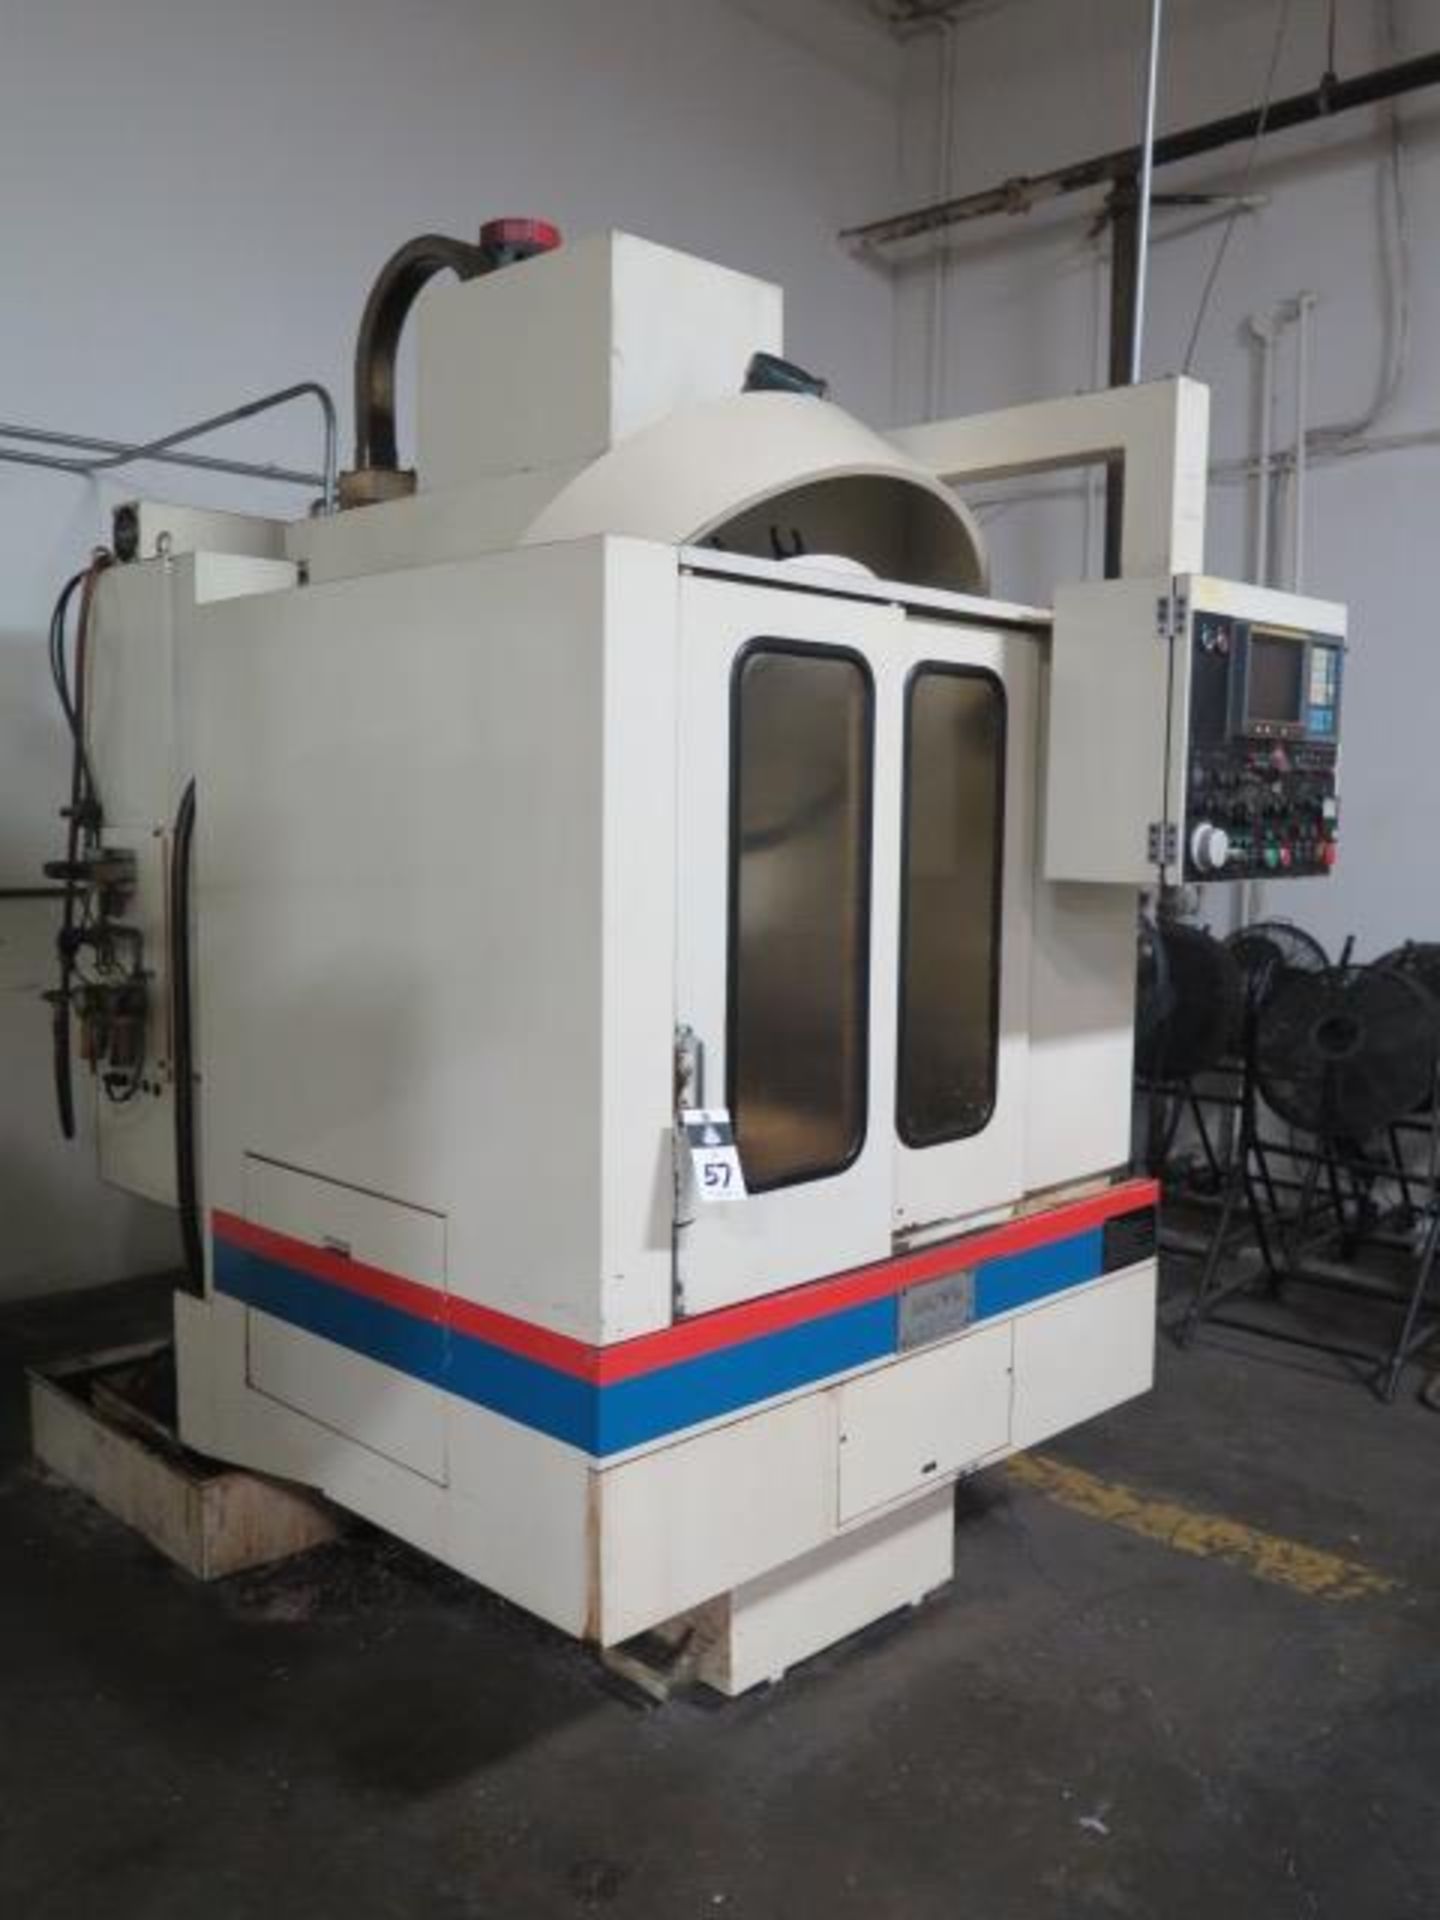 Takisawa MAC-V1E CNC Drilling/Tapping Center s/n TMYP8181 (X AXIS MOTOR MAKING NOISE), SOLD AS IS - Image 4 of 19